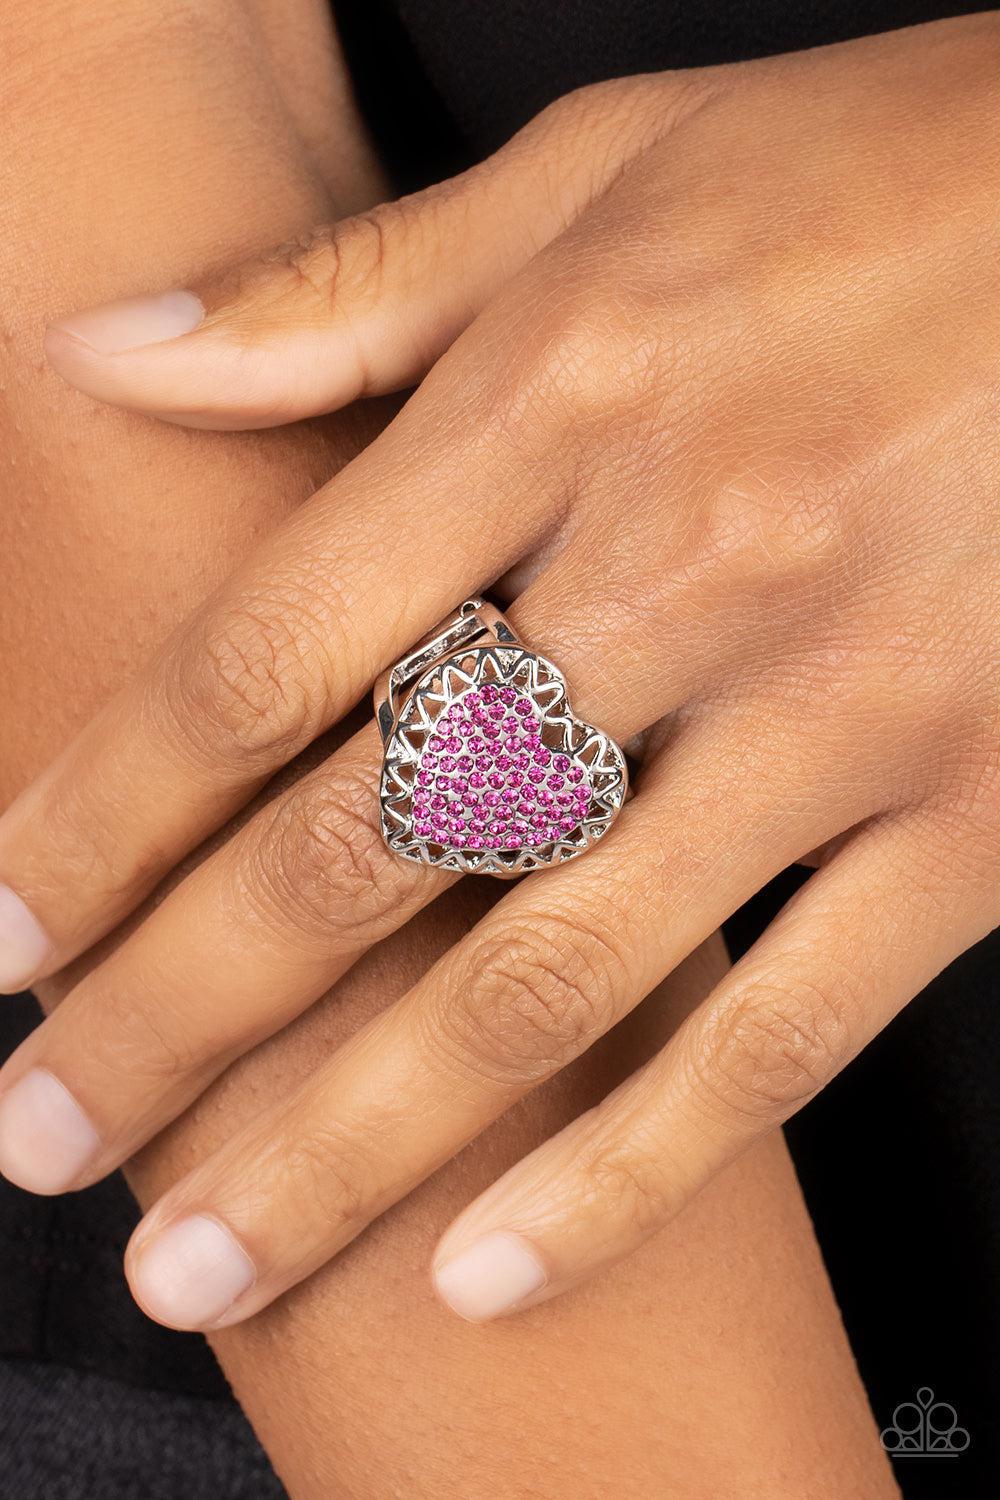 Romantic Escape Pink Rhinestone Heart Ring - Paparazzi Accessories- lightbox - CarasShop.com - $5 Jewelry by Cara Jewels